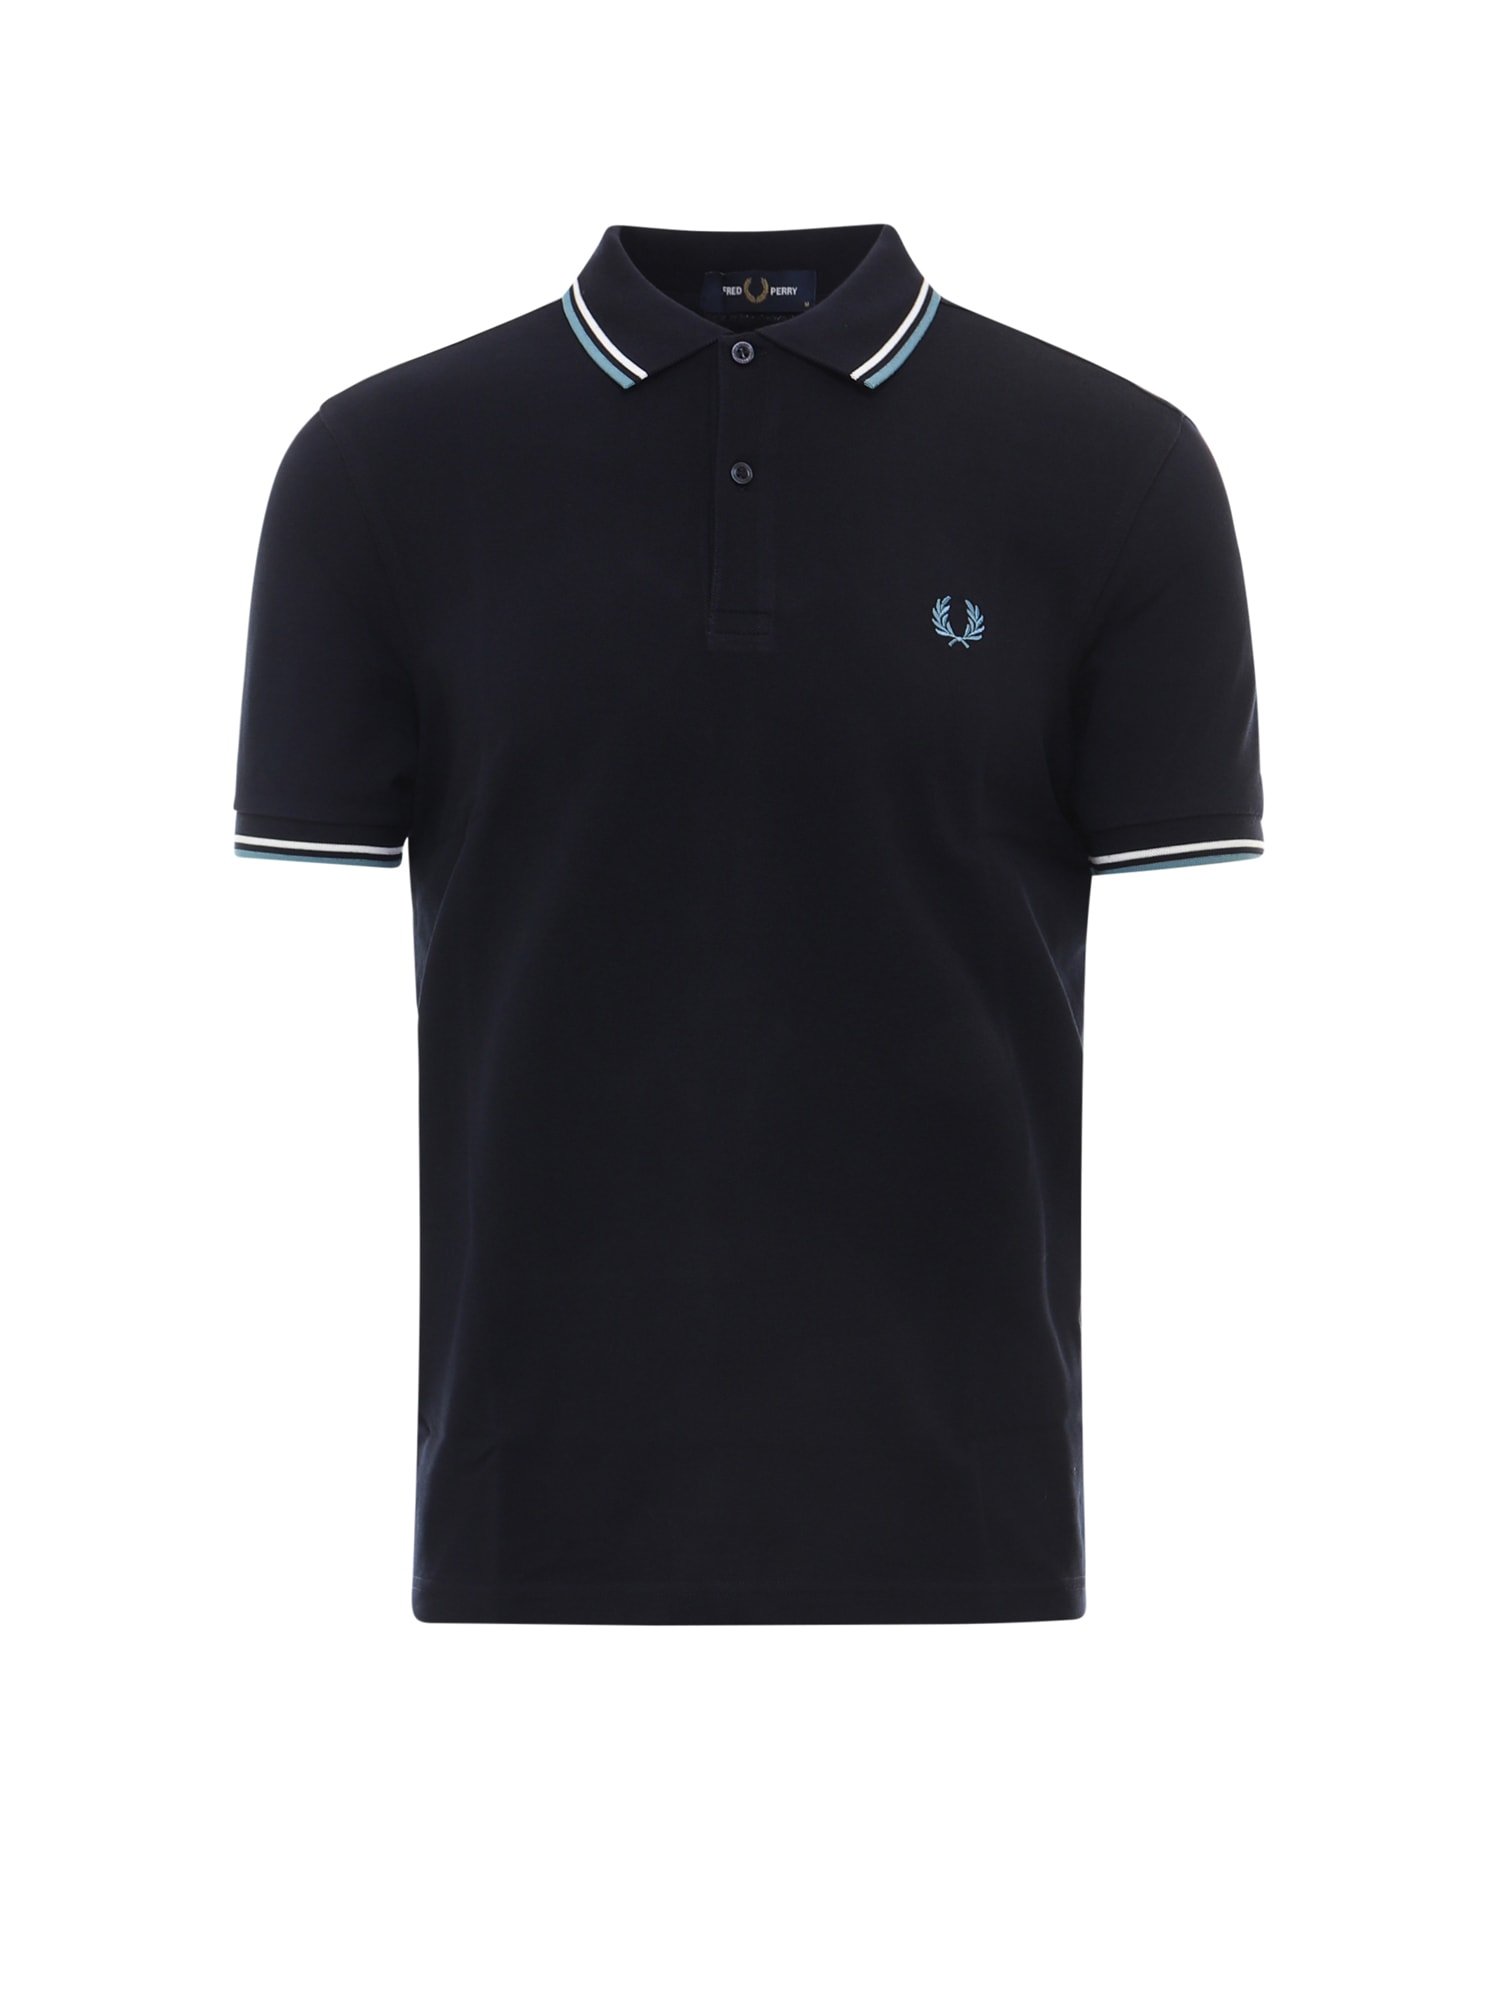 FRED PERRY POLO SHIRT,11885882